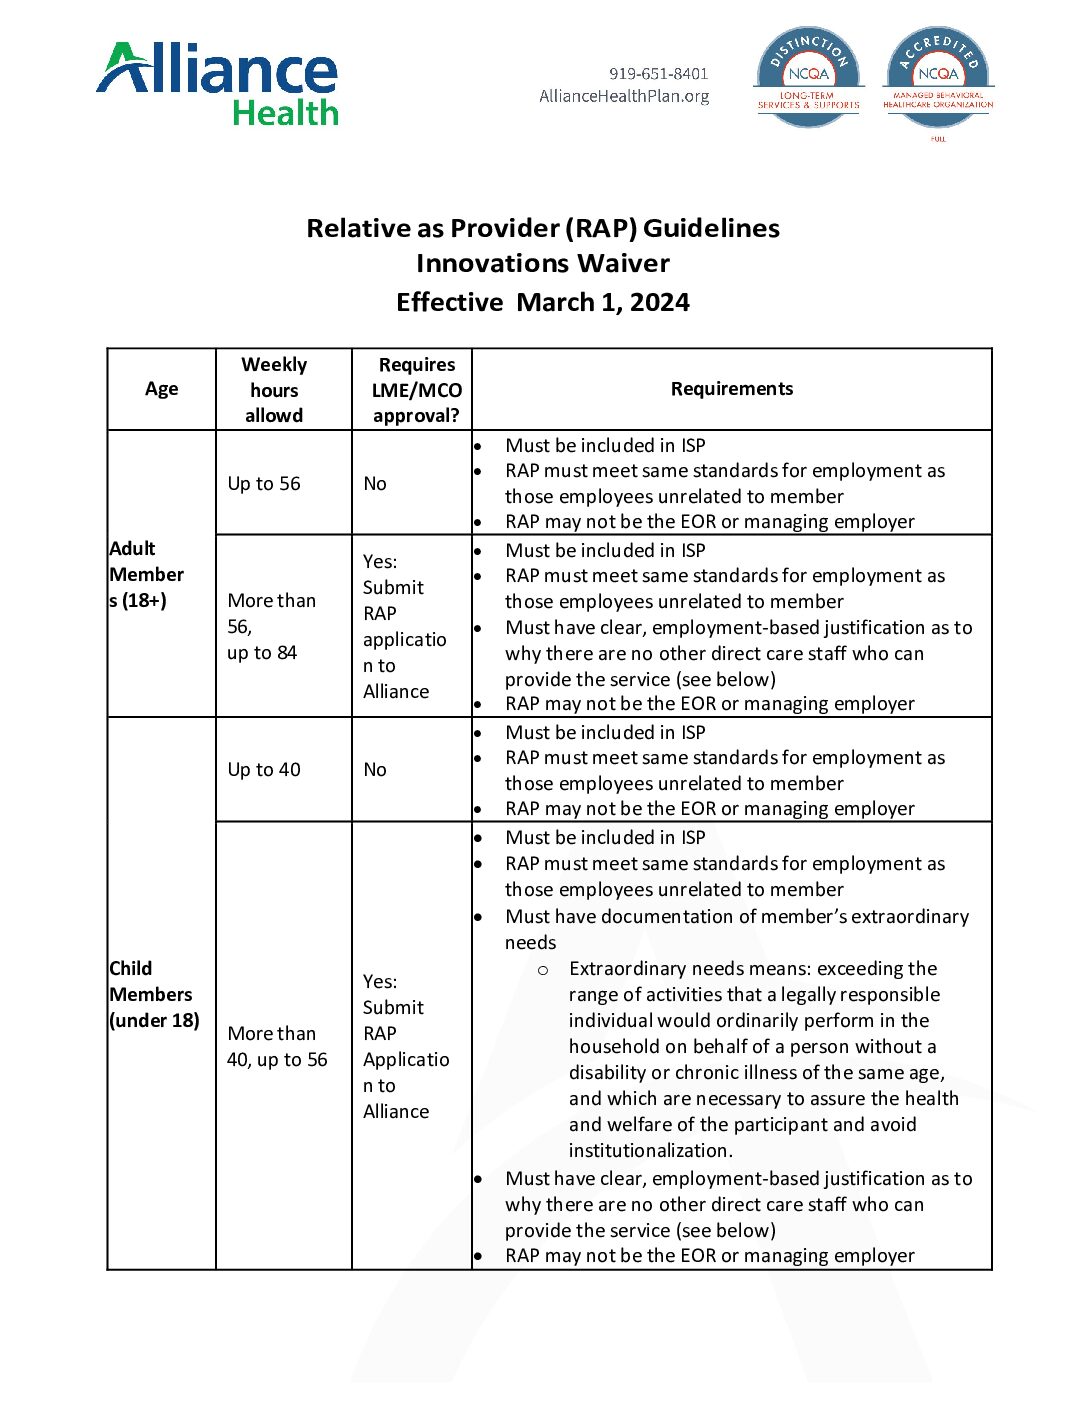 Relative as Provider (RAP) Guidelines